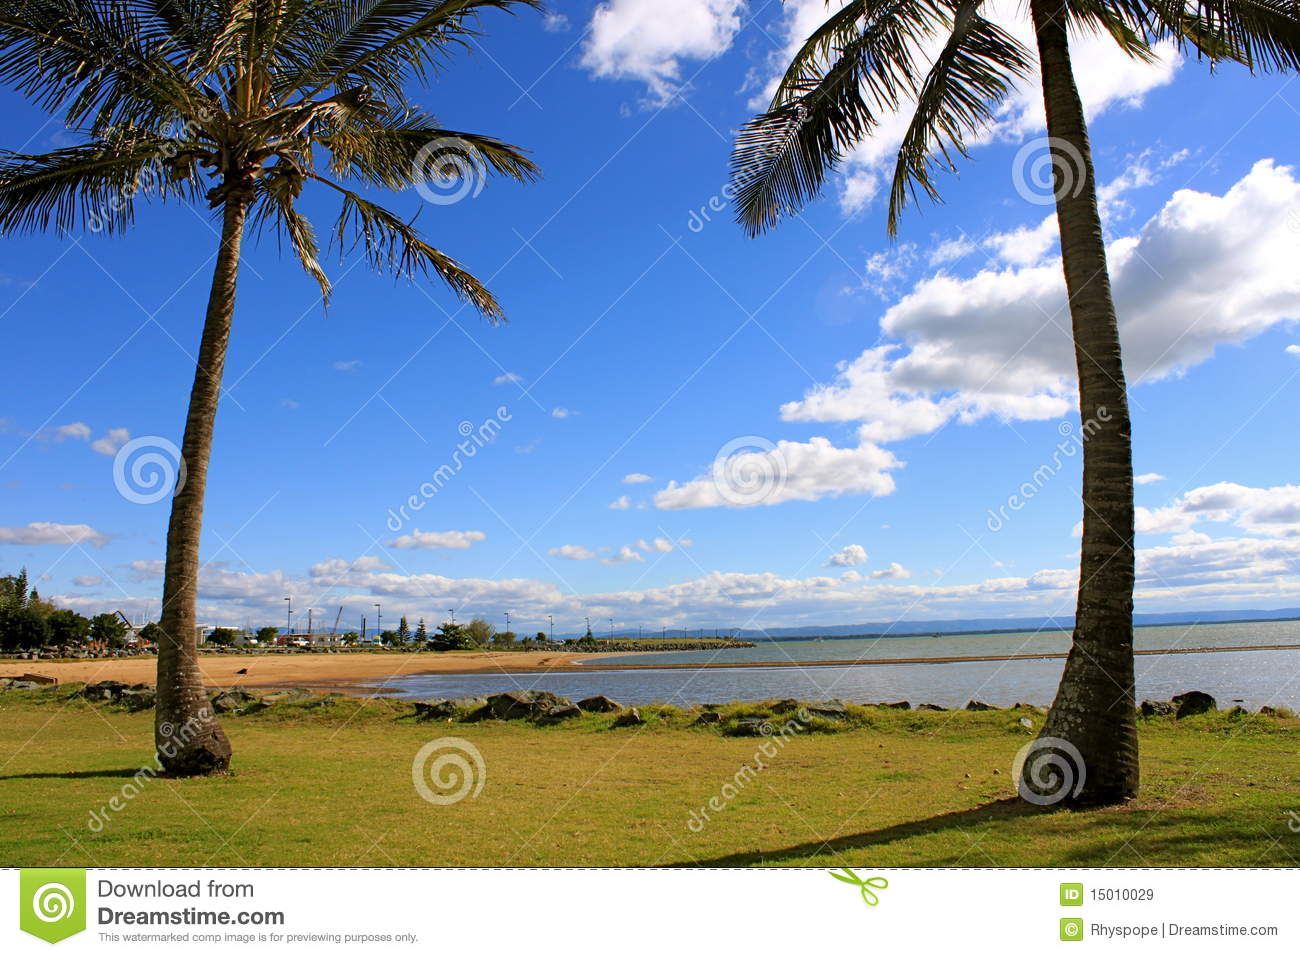 Another Day In Paradise Royalty Free Stock Images   Image  15010029